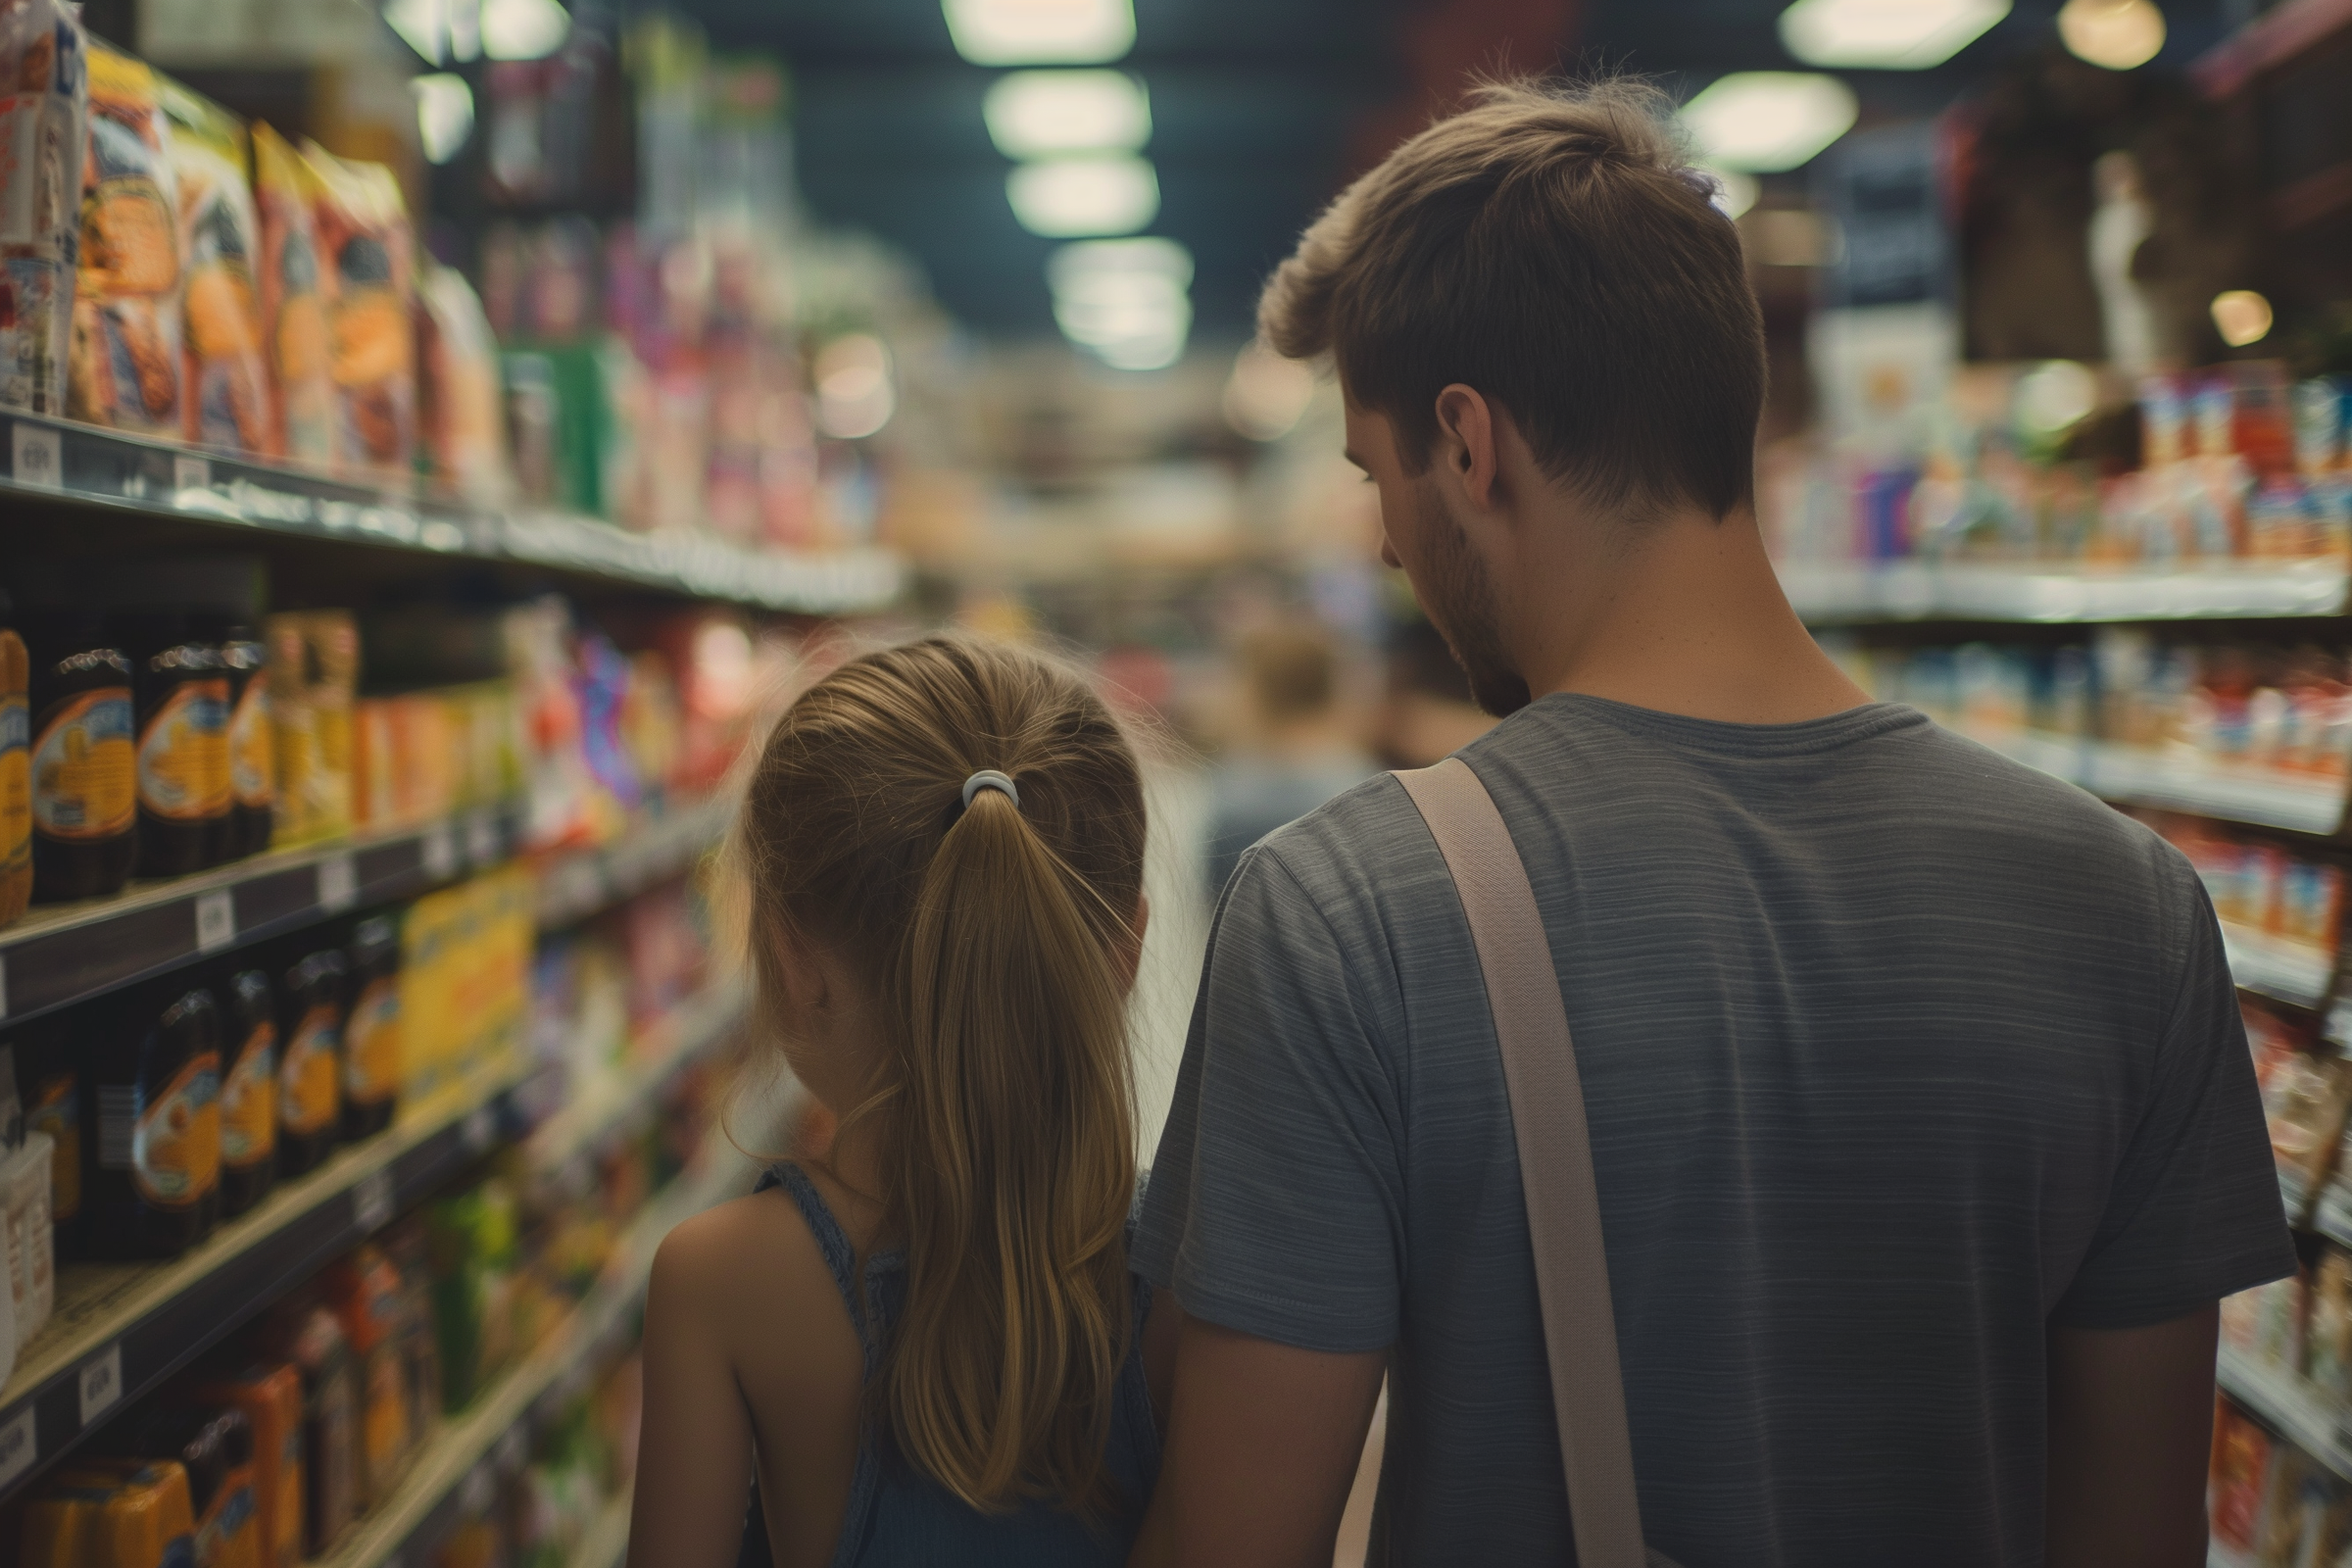 A dad and daughter shopping | Source: Midjourney